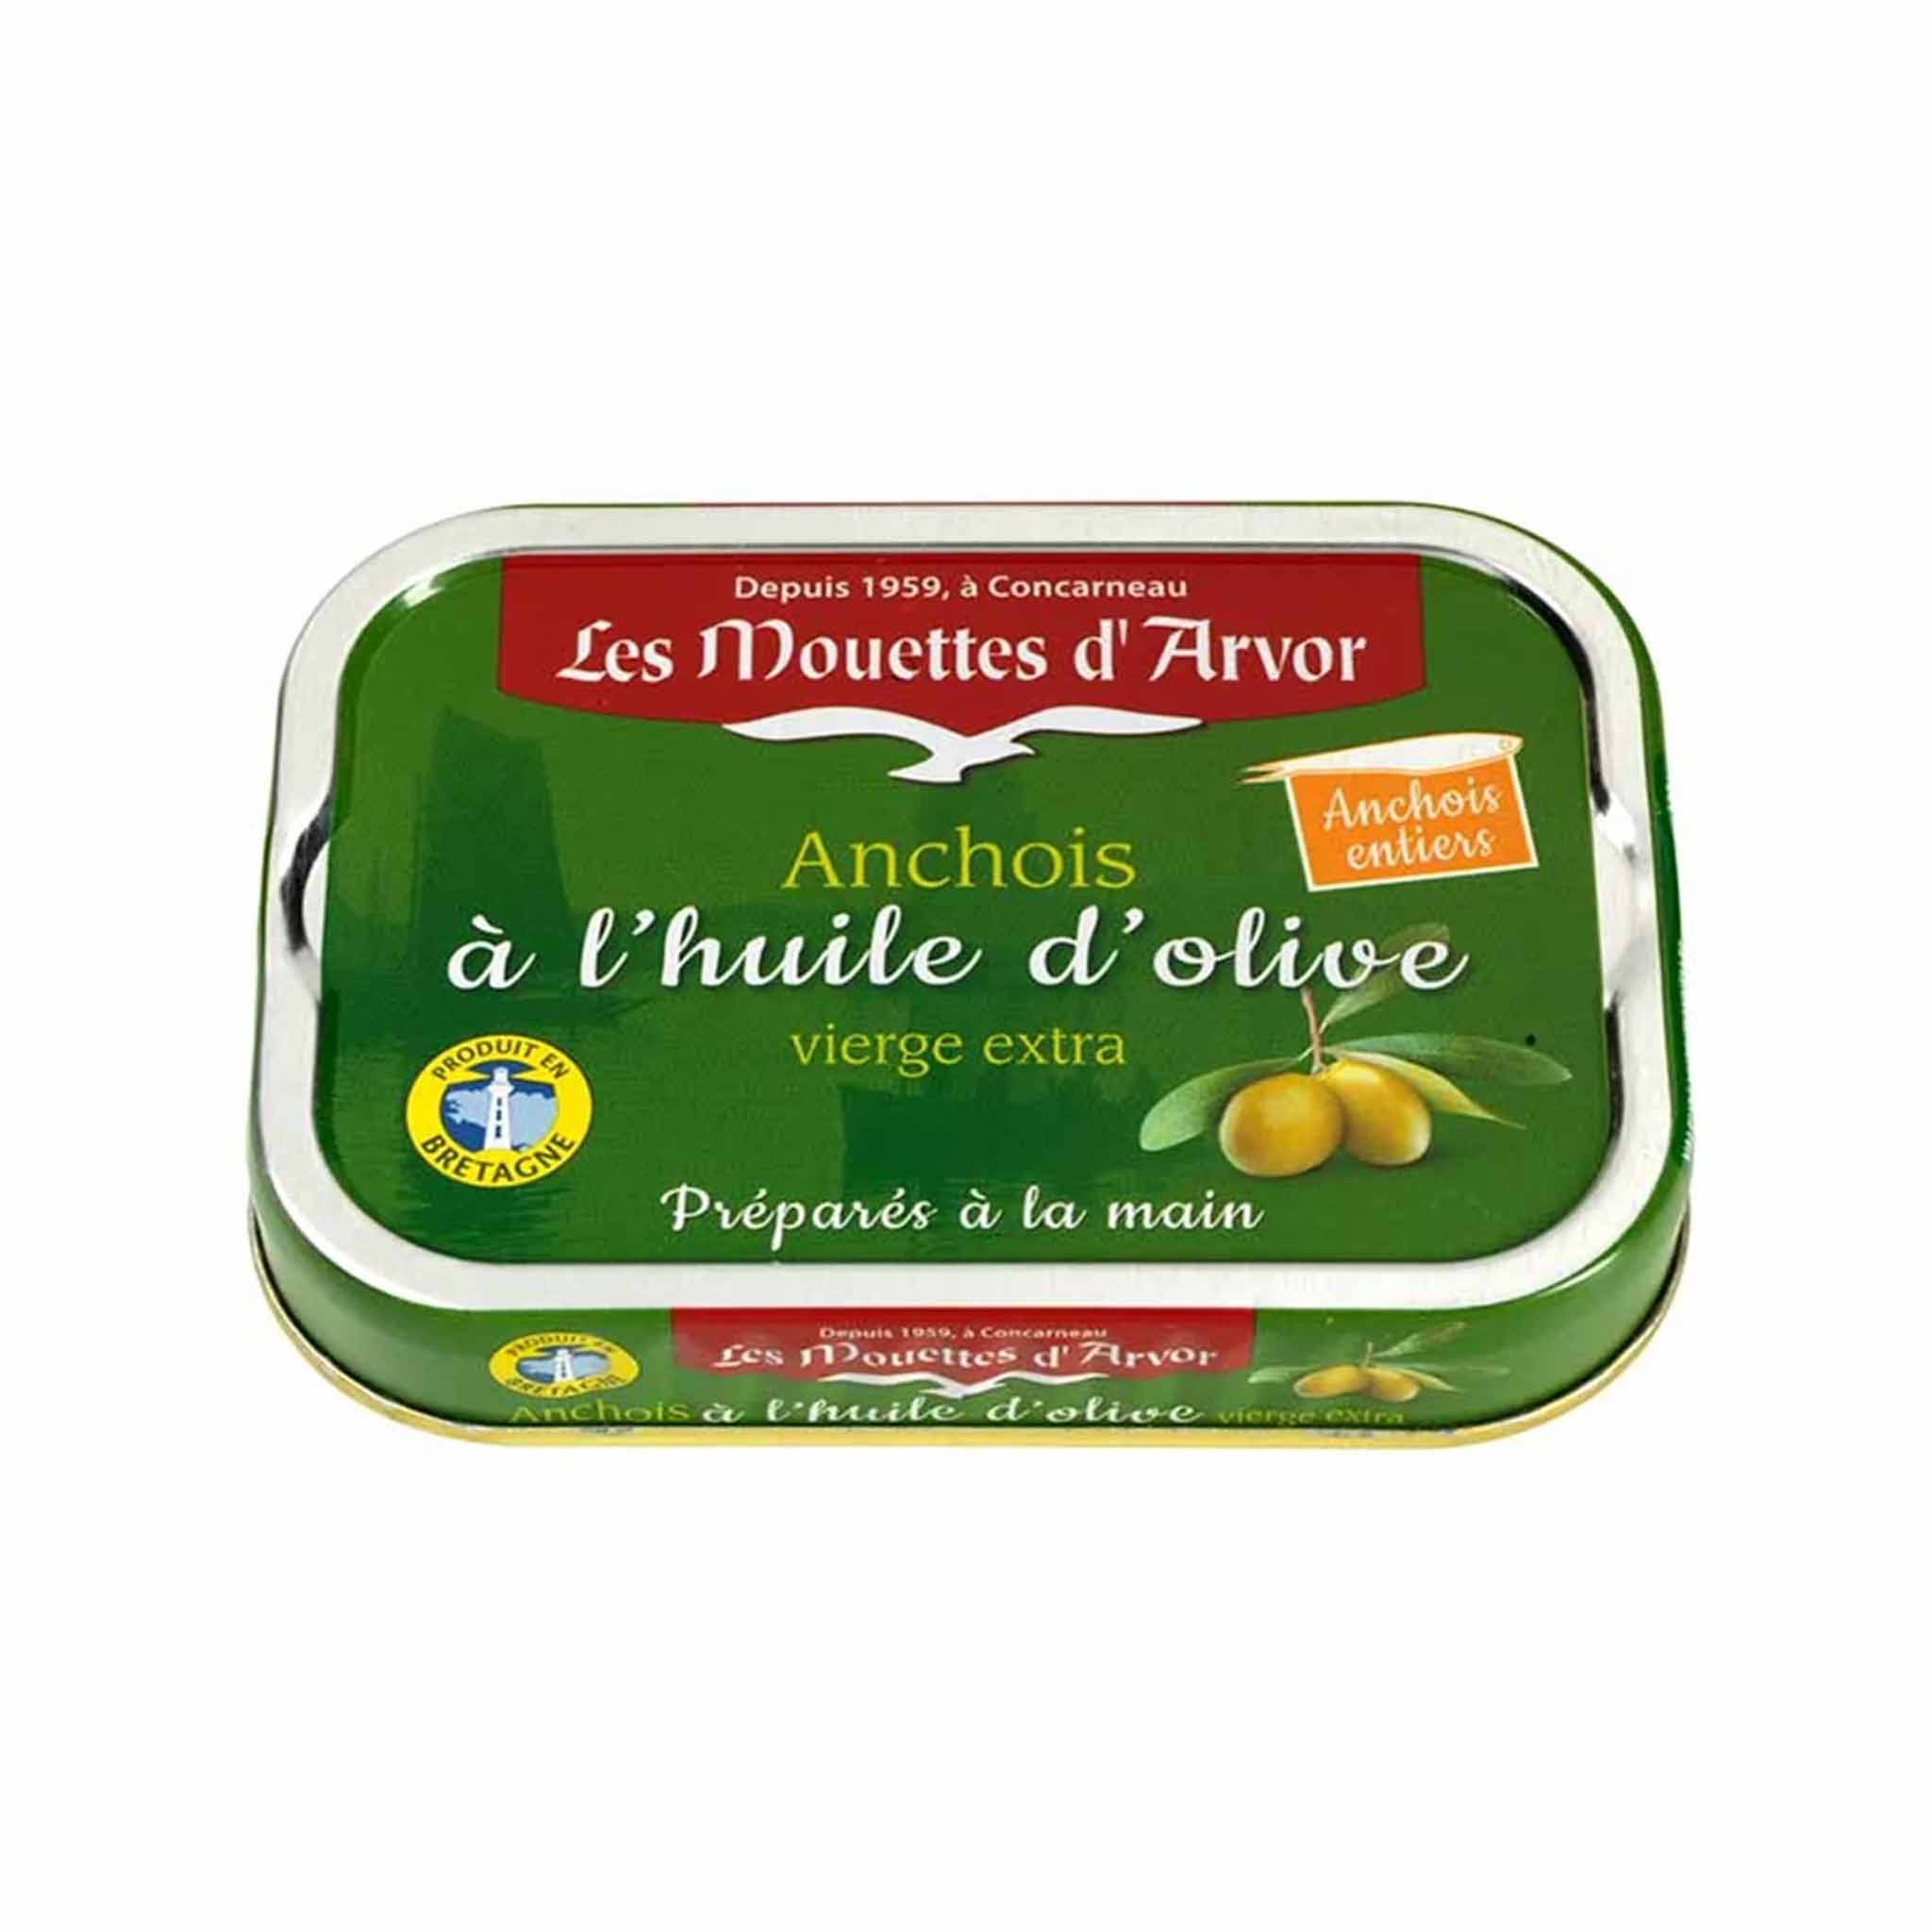 Les Mouettes d'Arvor Anchovies in Extra Virgin Olive Oil